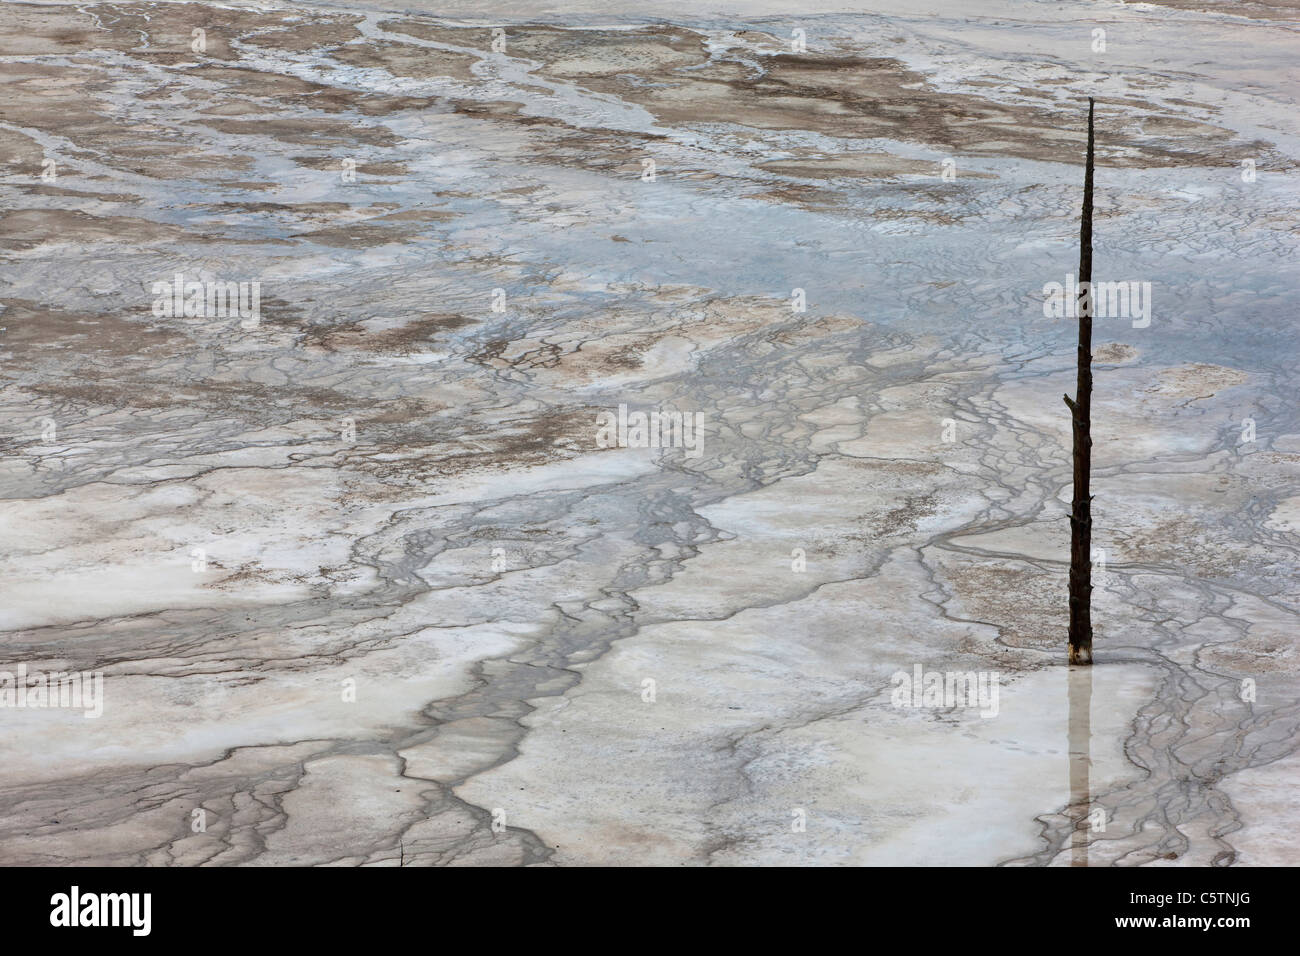 USA, Wyoming, Yellowstone National Park, Grand Prismatic Spring avec des arbres morts, close-up Banque D'Images